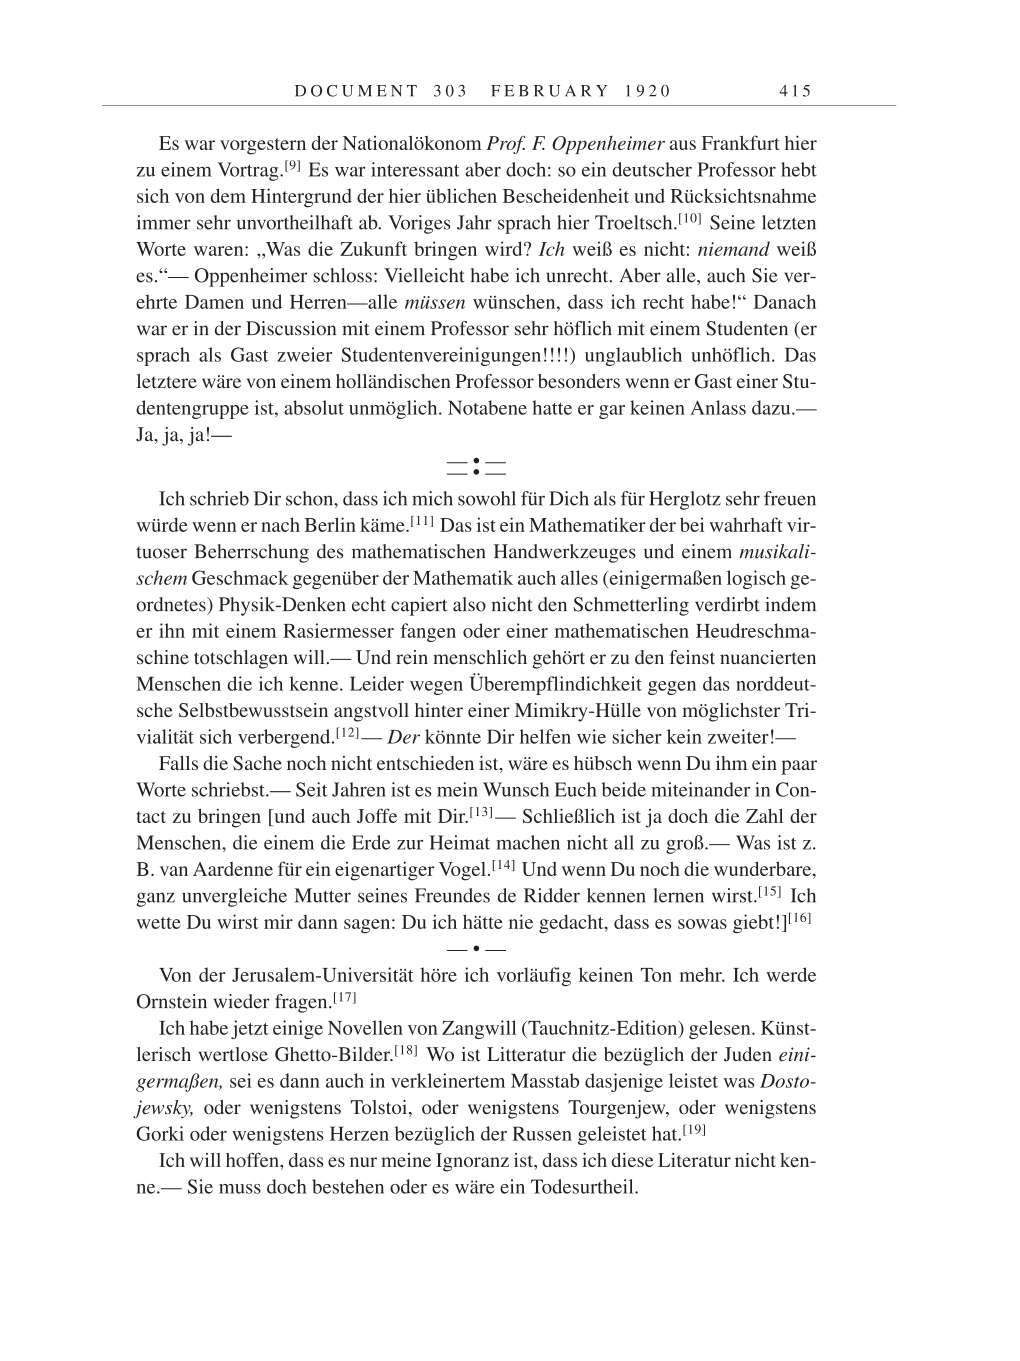 Volume 9: The Berlin Years: Correspondence January 1919-April 1920 page 415